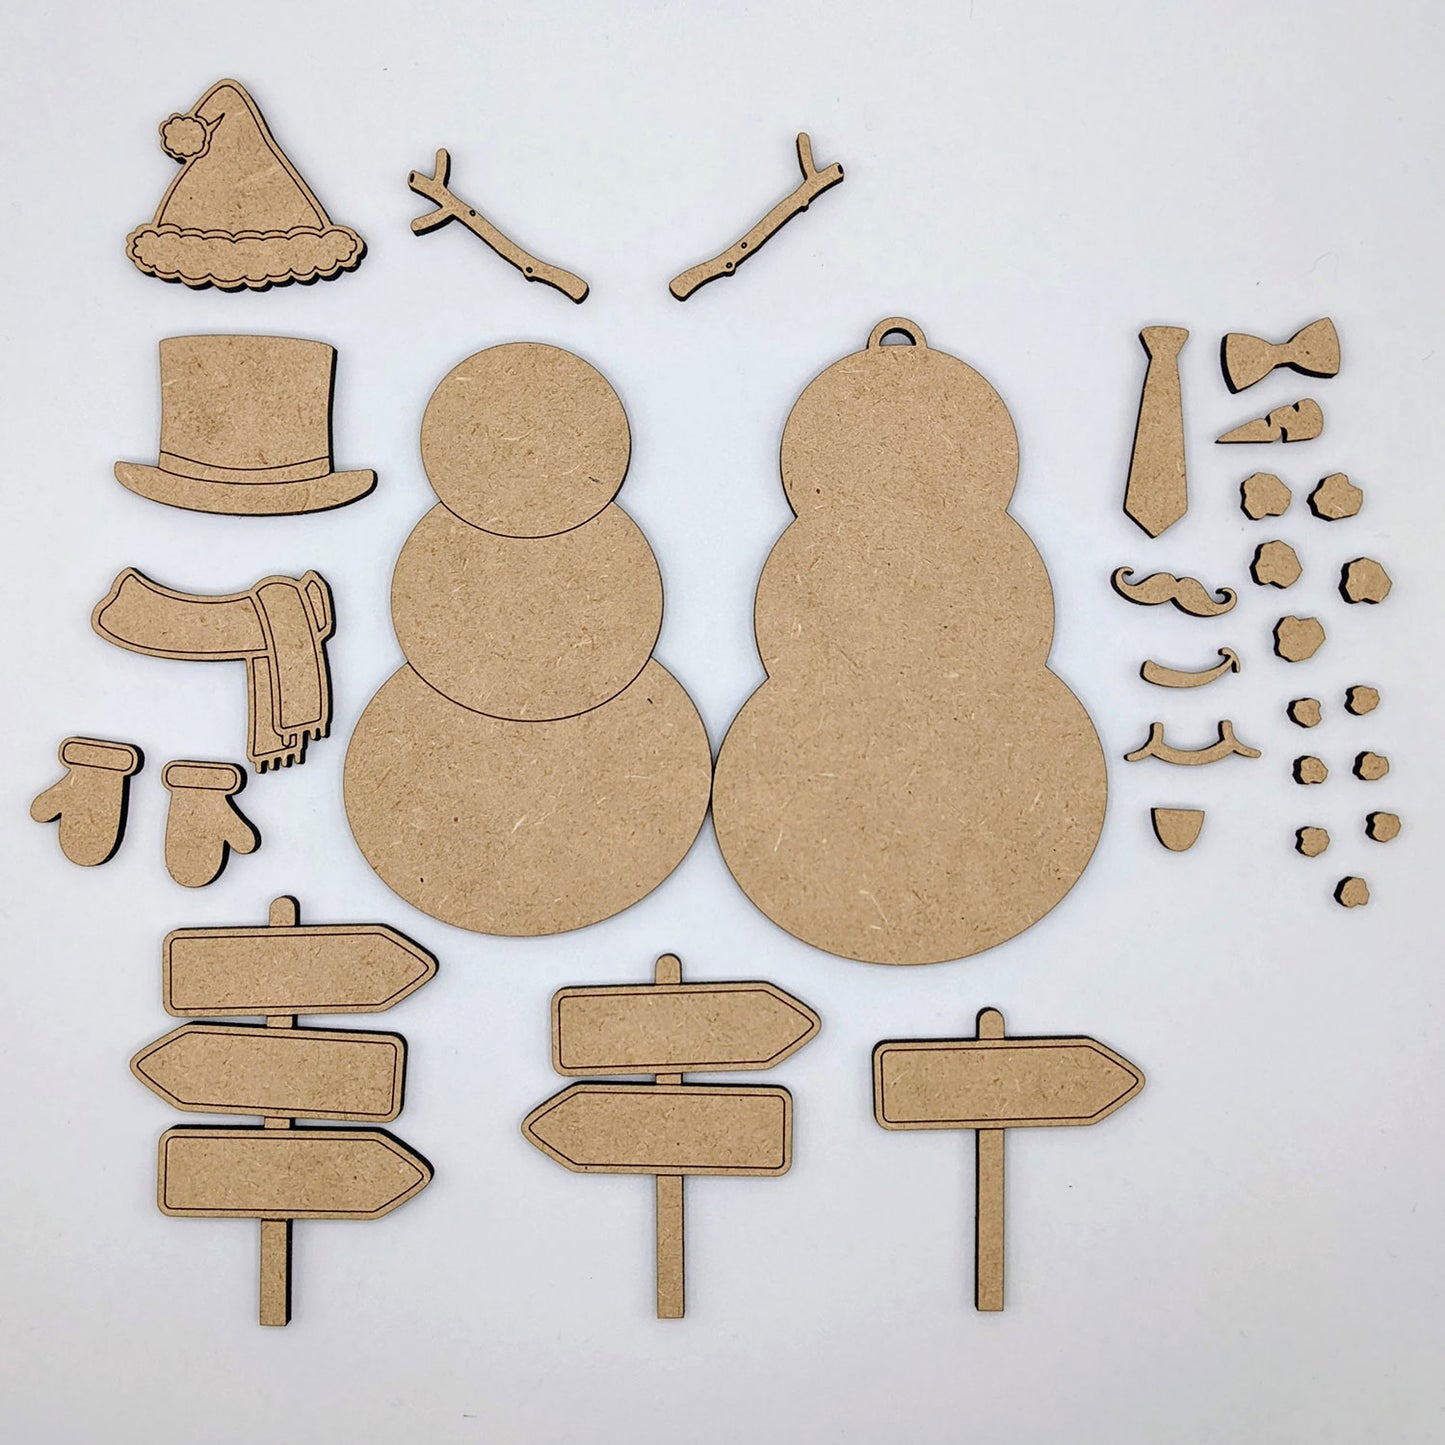 Want to Build a Snowman...Ornament?